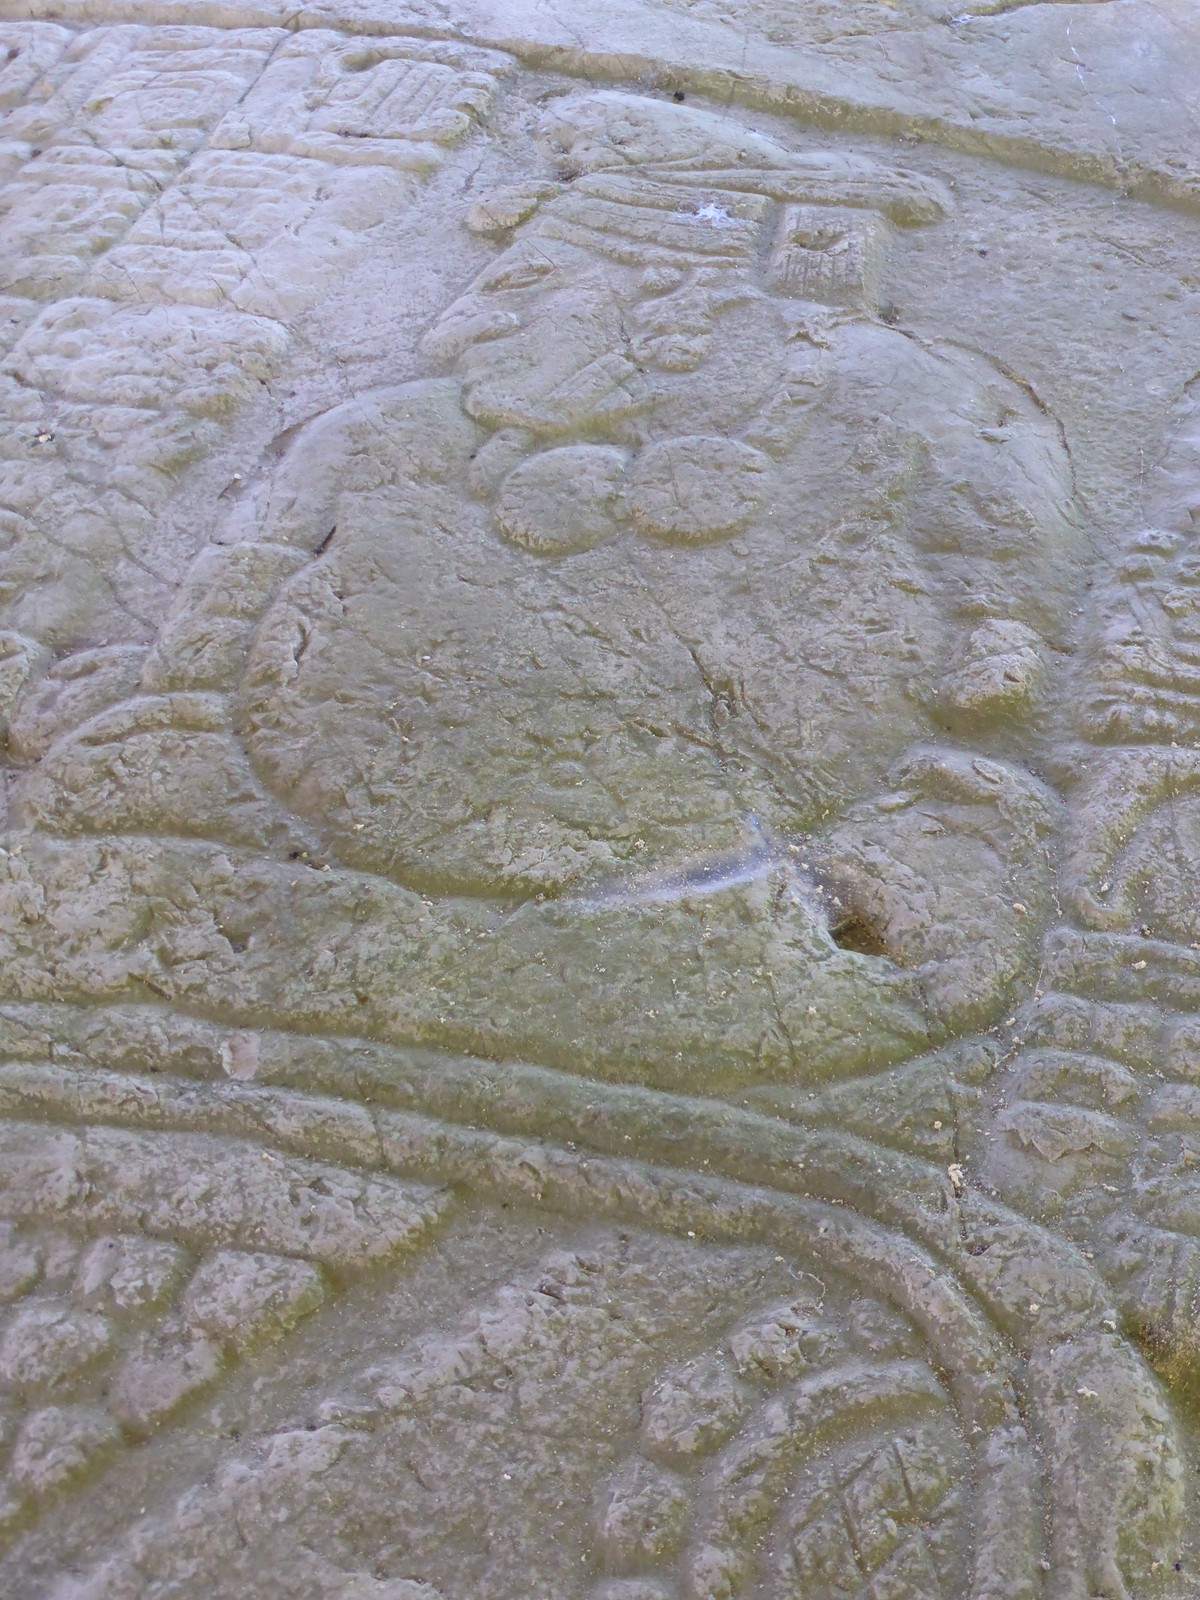 One of the carved stelae, showing a captured enemy with his hands tied behind his back